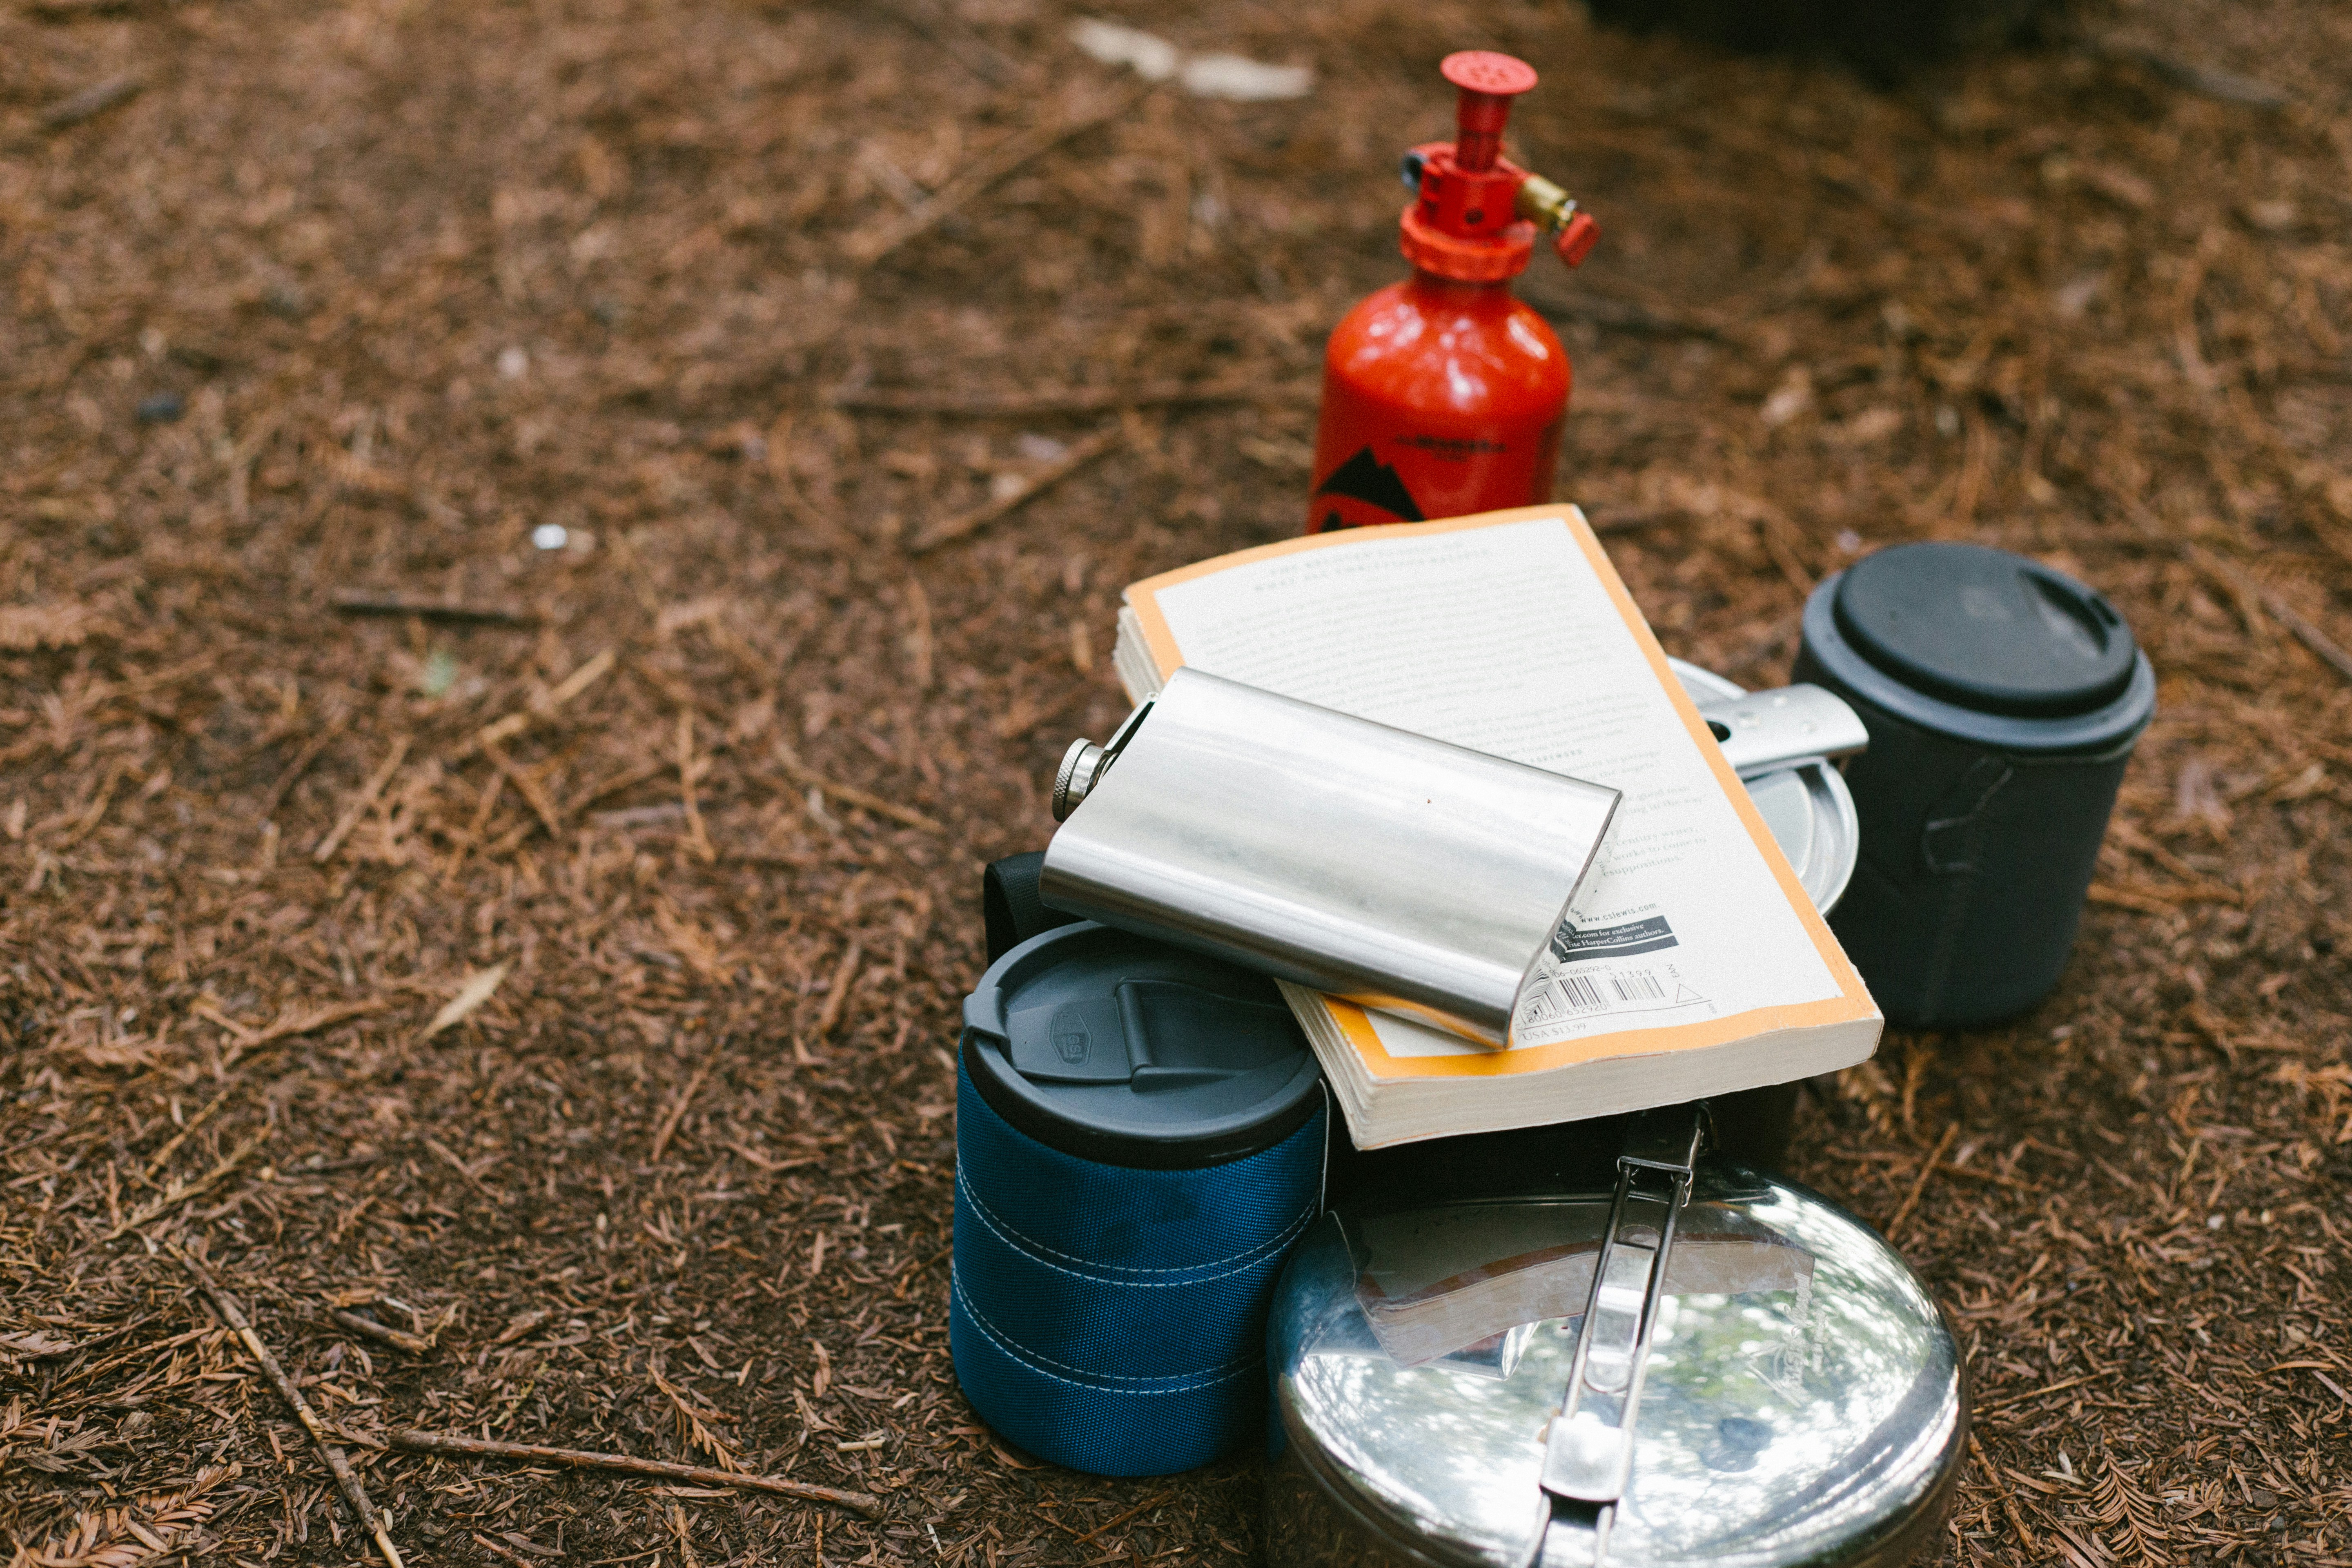 It may add a bit of weight on a backpacking trip, but you can’t go wrong with a bit of whiskey and a good book.